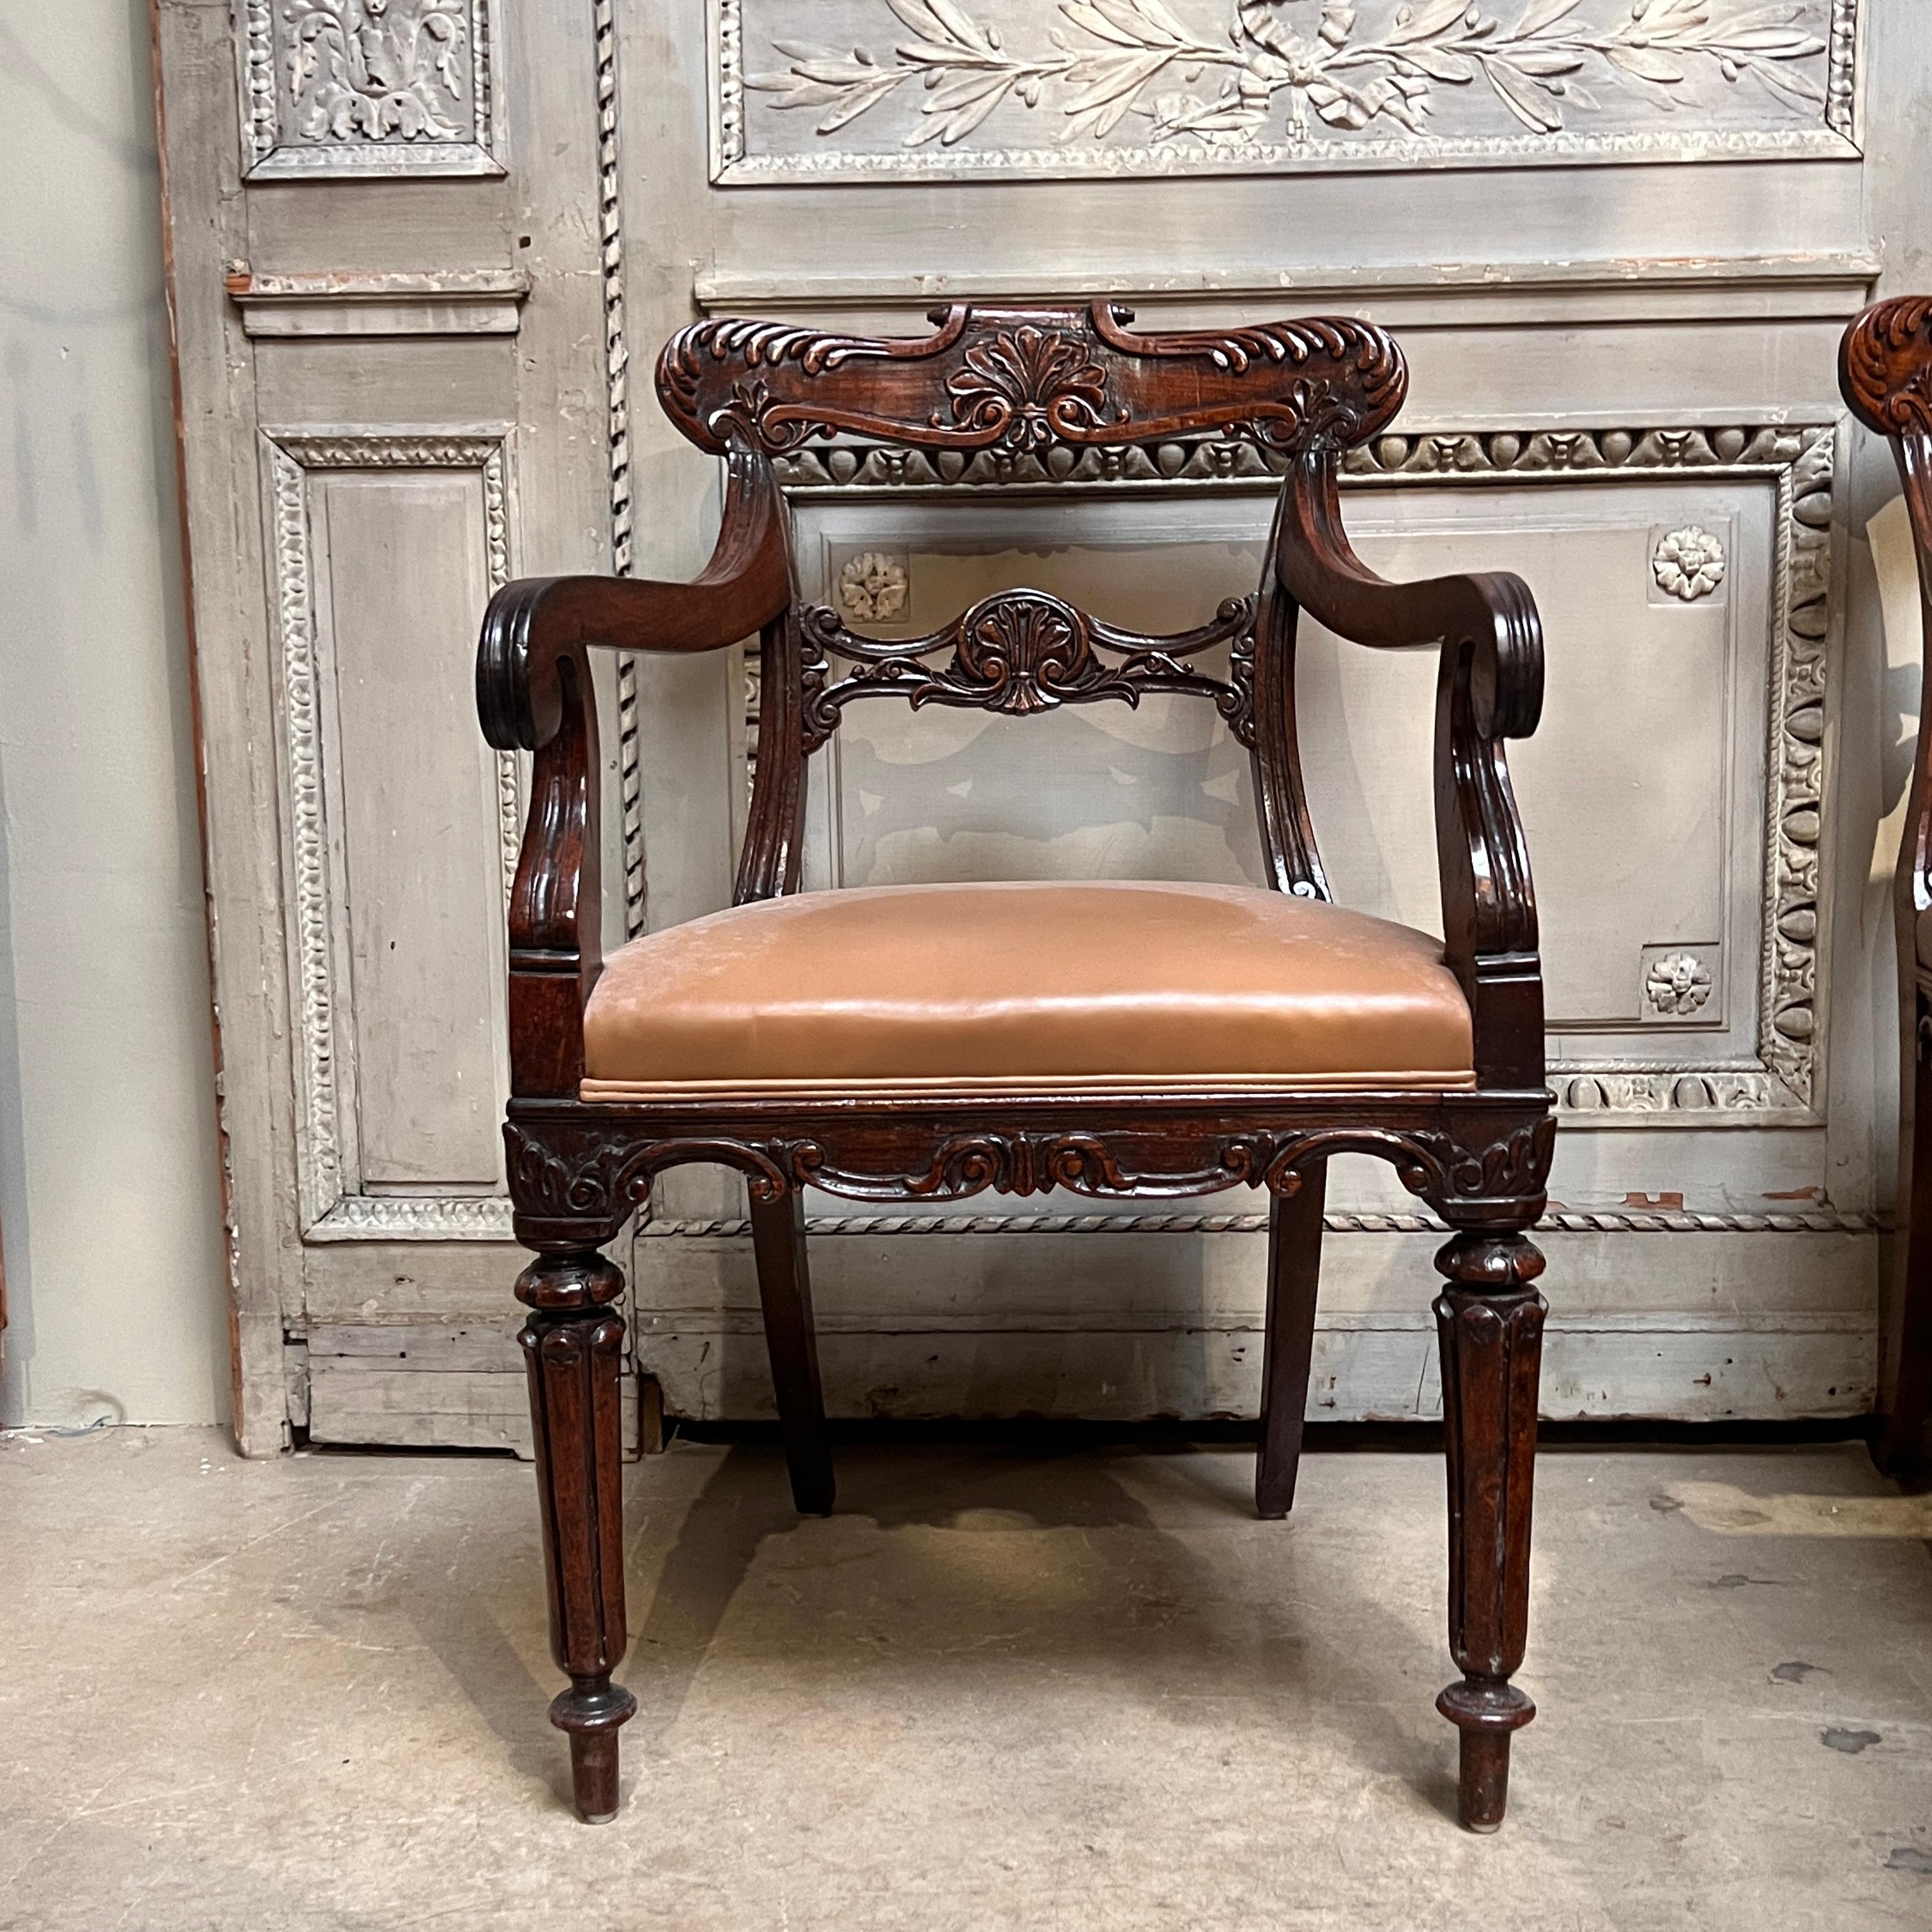 A beautiful set of 19th Century English Dining Armchairs made in solid Padauk with acanthus carved details throughout and raised on reeded front legs.  Strong sturdy chairs with wonderful colour.  Circa 1830.
The chairs are upholstered in a nice